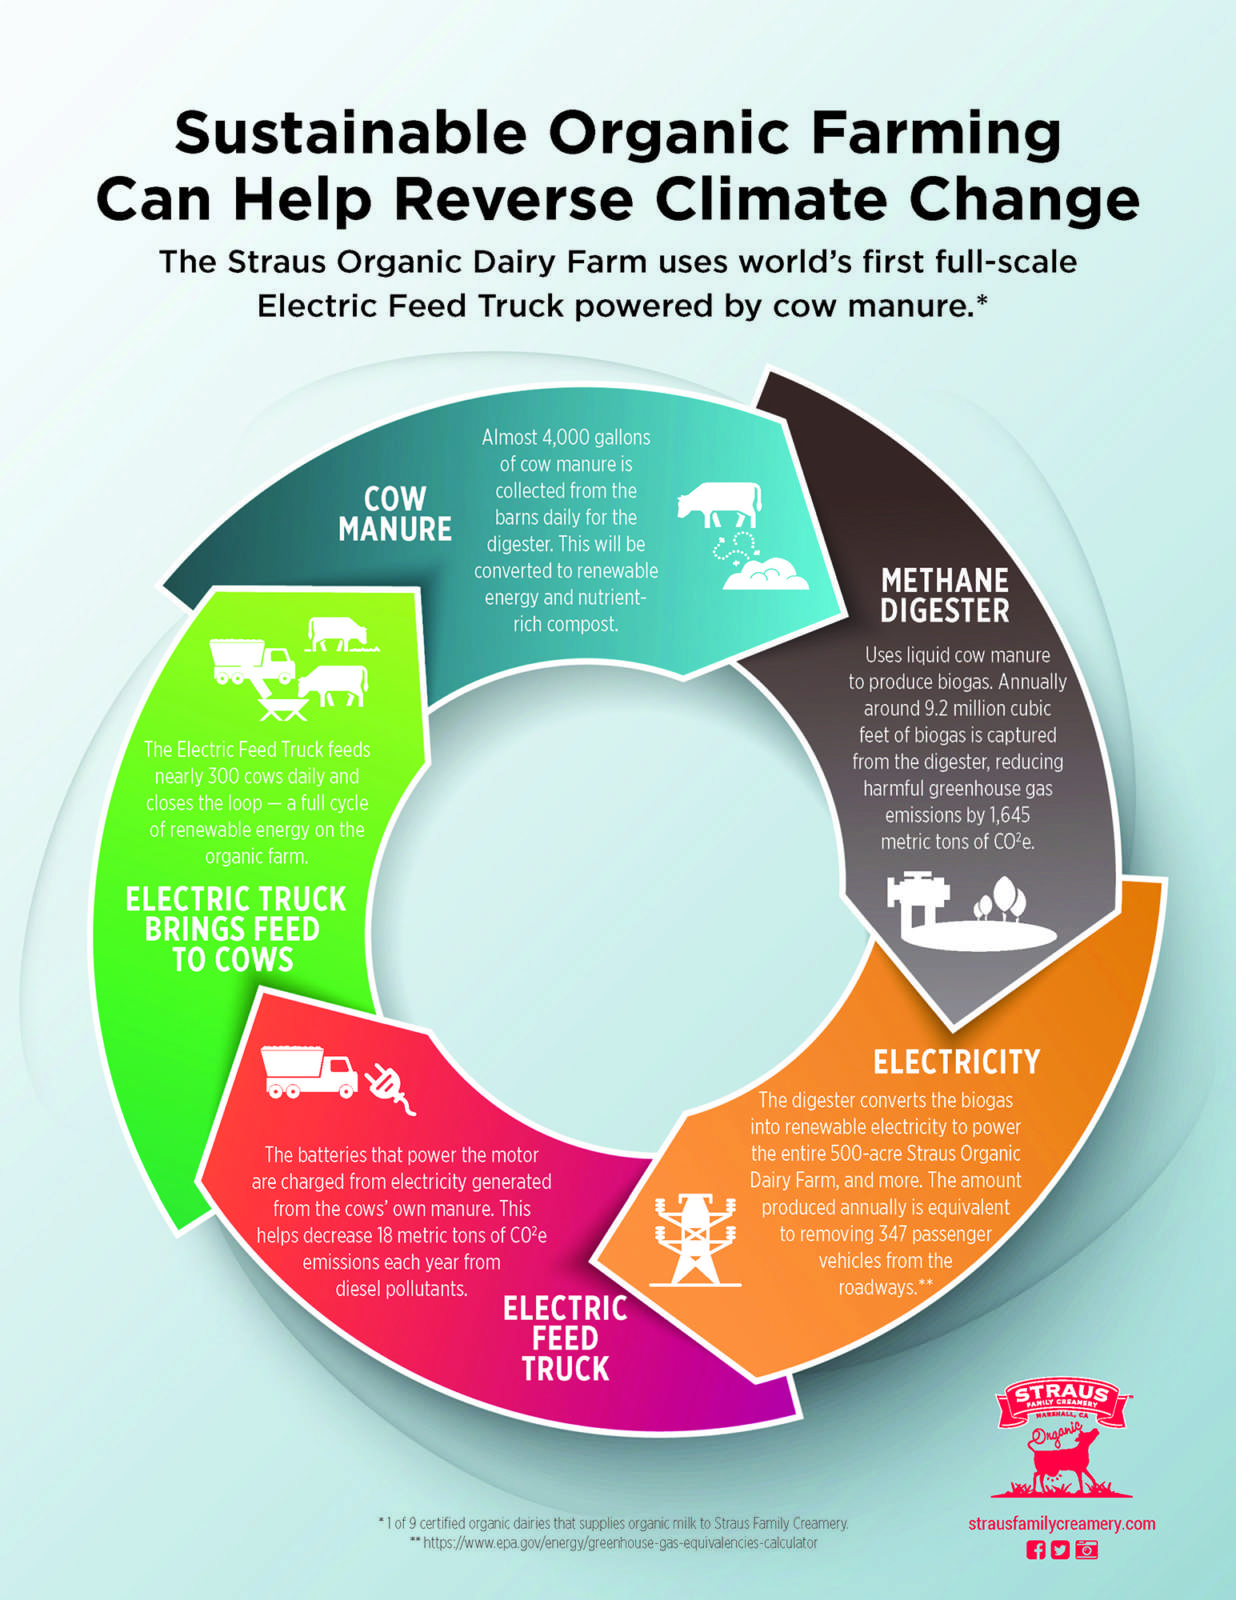 A chart showing how Straus dairy uses sustainable organic farming to help reverse climate change through sustainable practices.